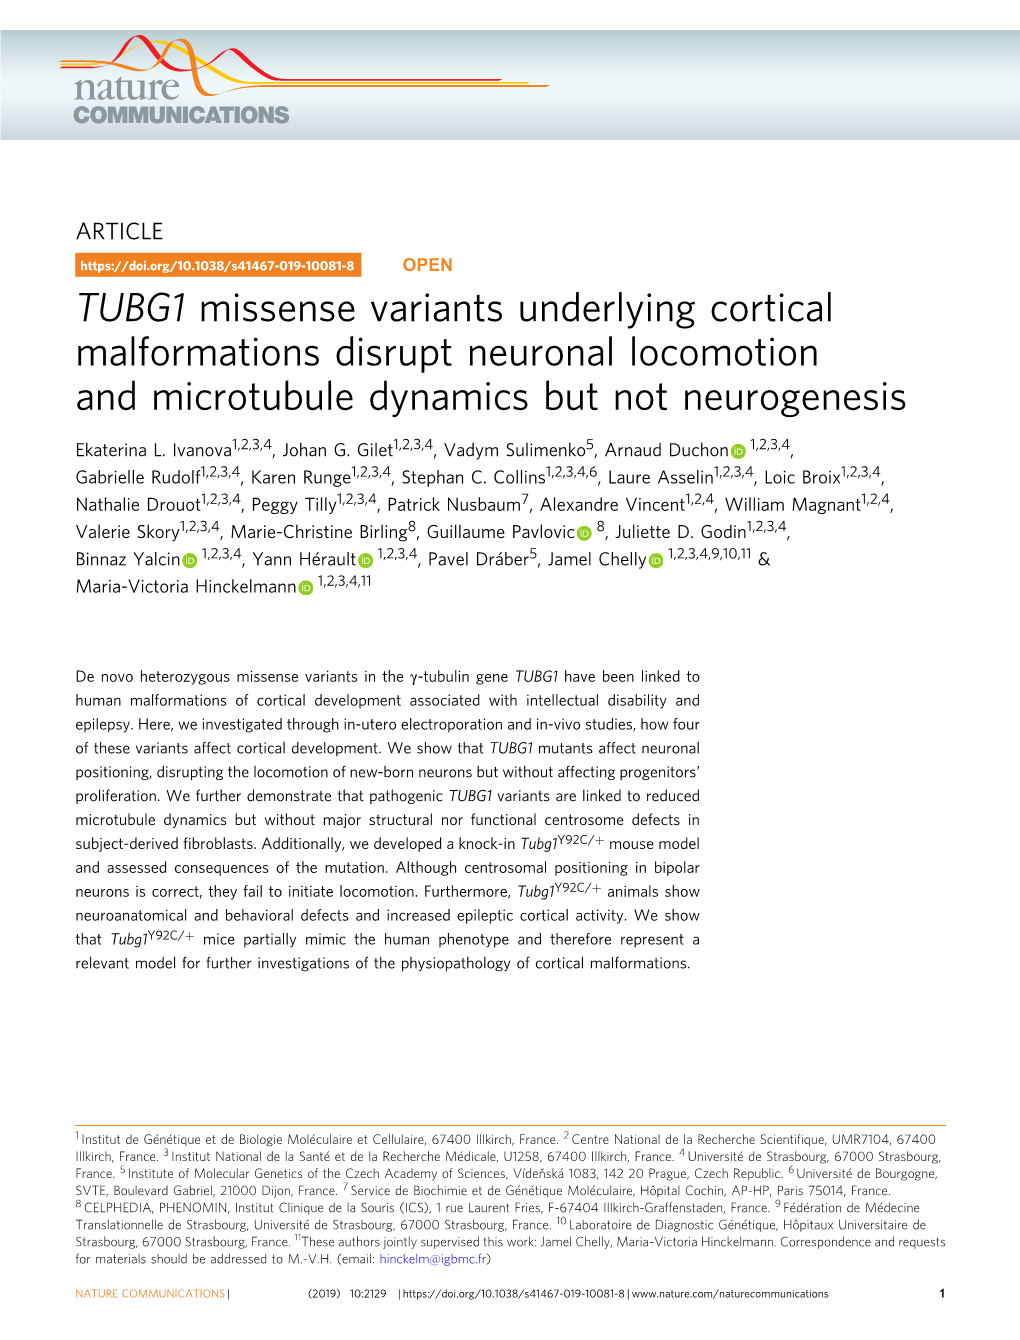 TUBG1 Missense Variants Underlying Cortical Malformations Disrupt Neuronal Locomotion and Microtubule Dynamics but Not Neurogenesis